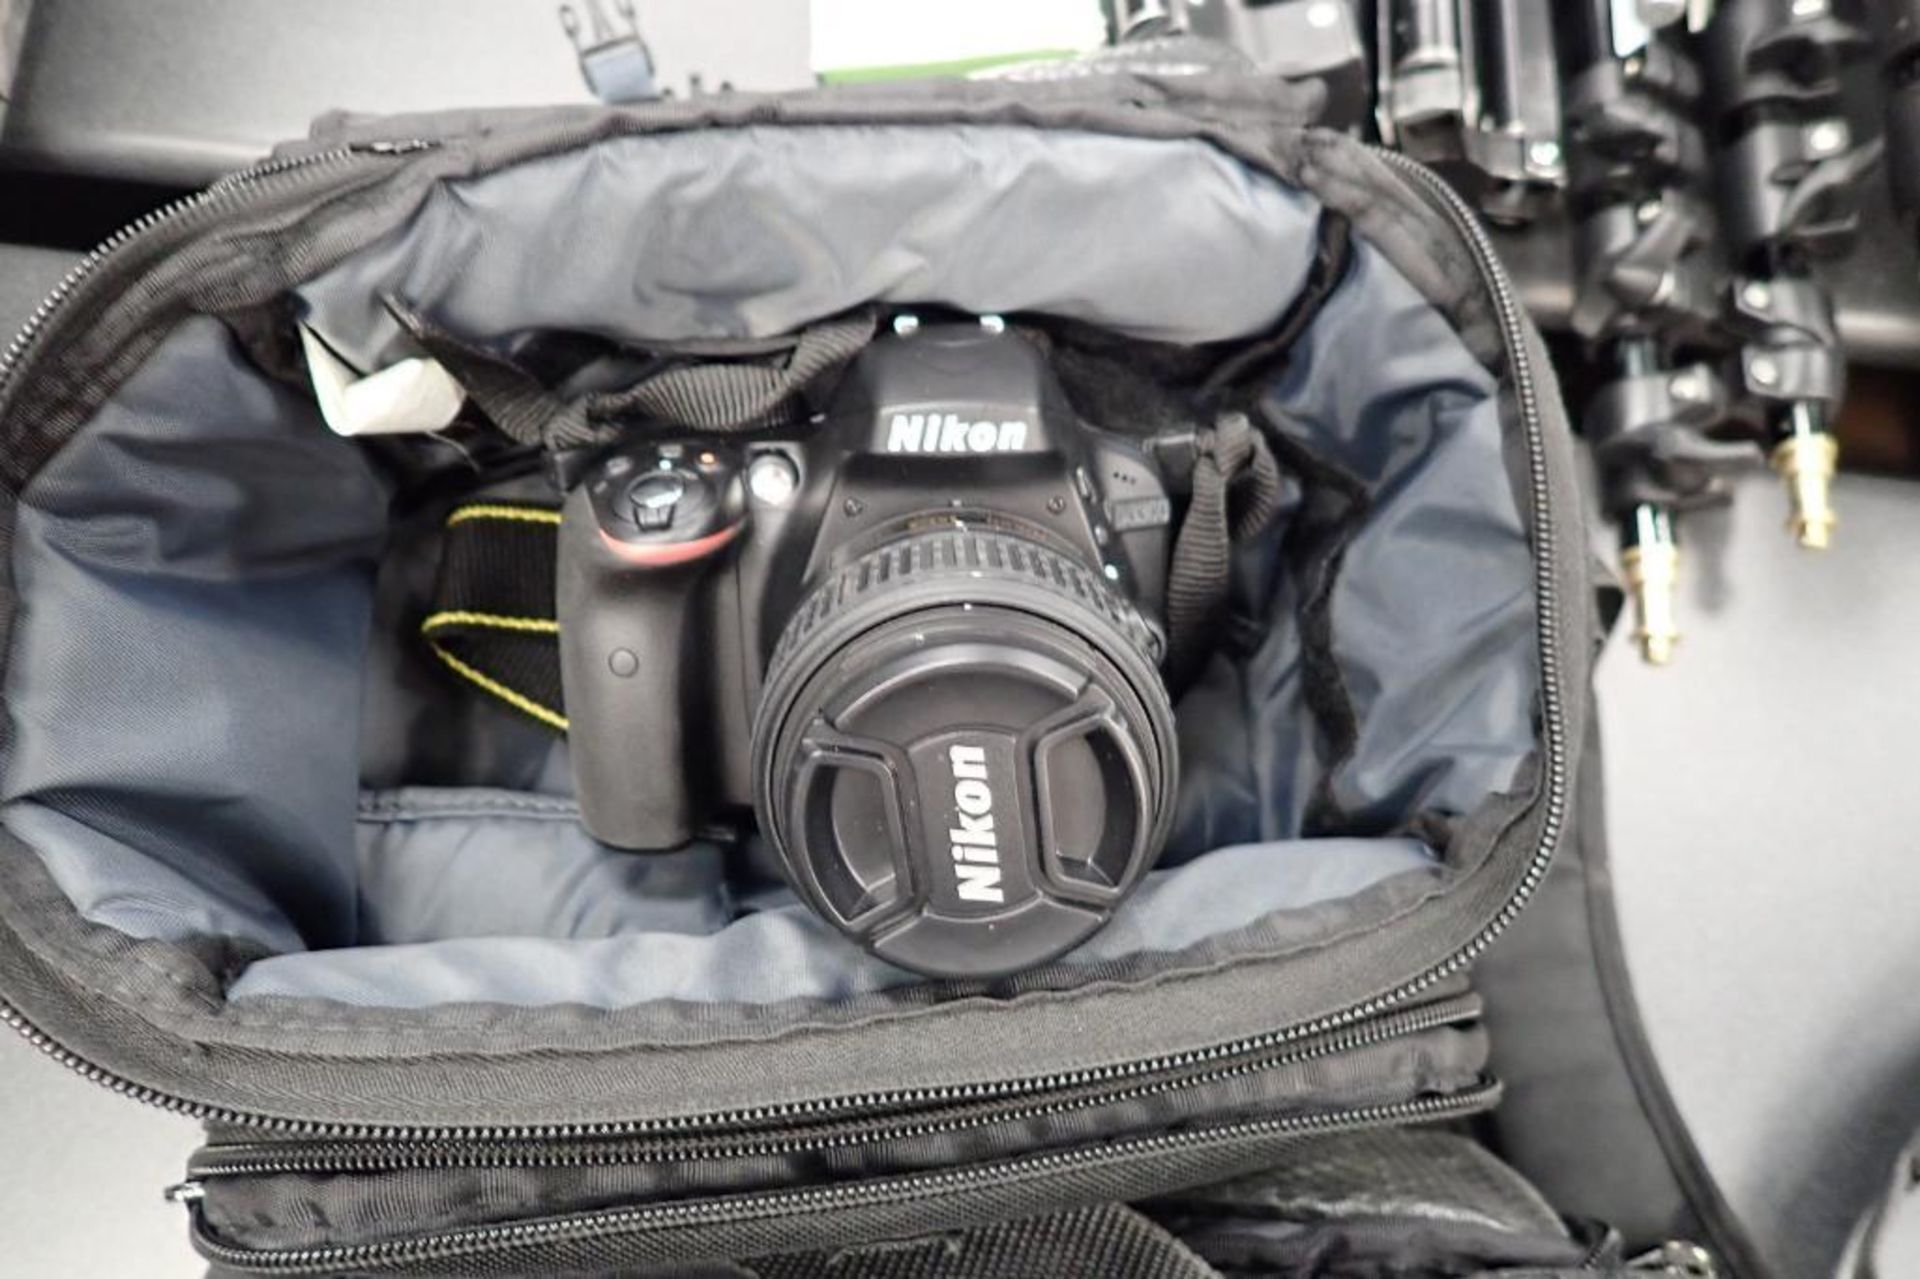 Nikon D3300 professional camera with case - Image 7 of 7